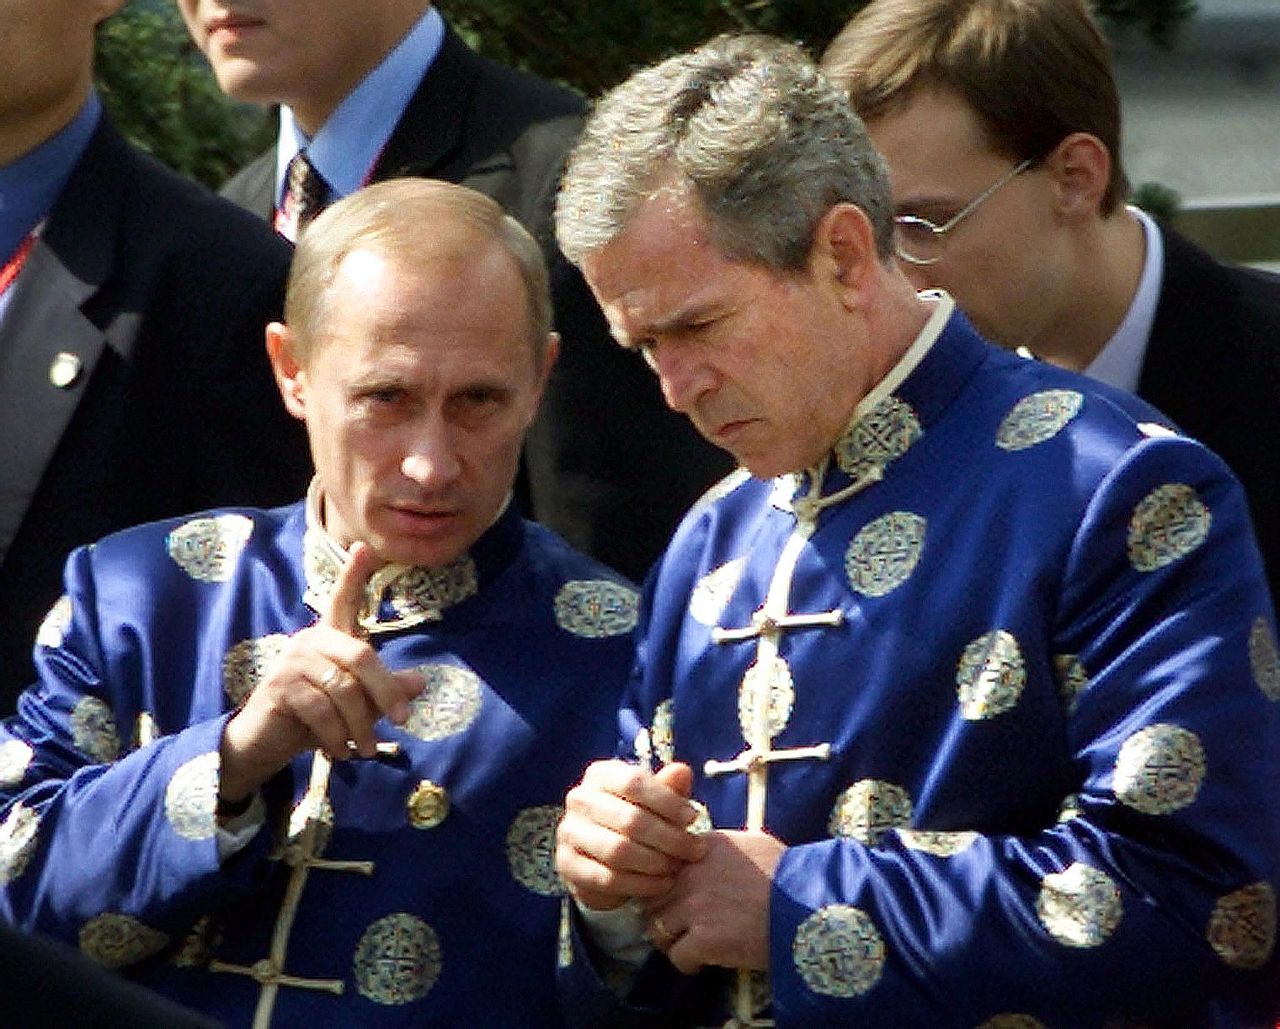 Russian president Vladimir Putin effortlessly pulled off this updated version of the Chinese silk embroidered jacket worn by APEC attendees in Shanghai. George W. Bush seemed a little flummoxed by it all. (He would later gain sartorial revenge -- click on.)